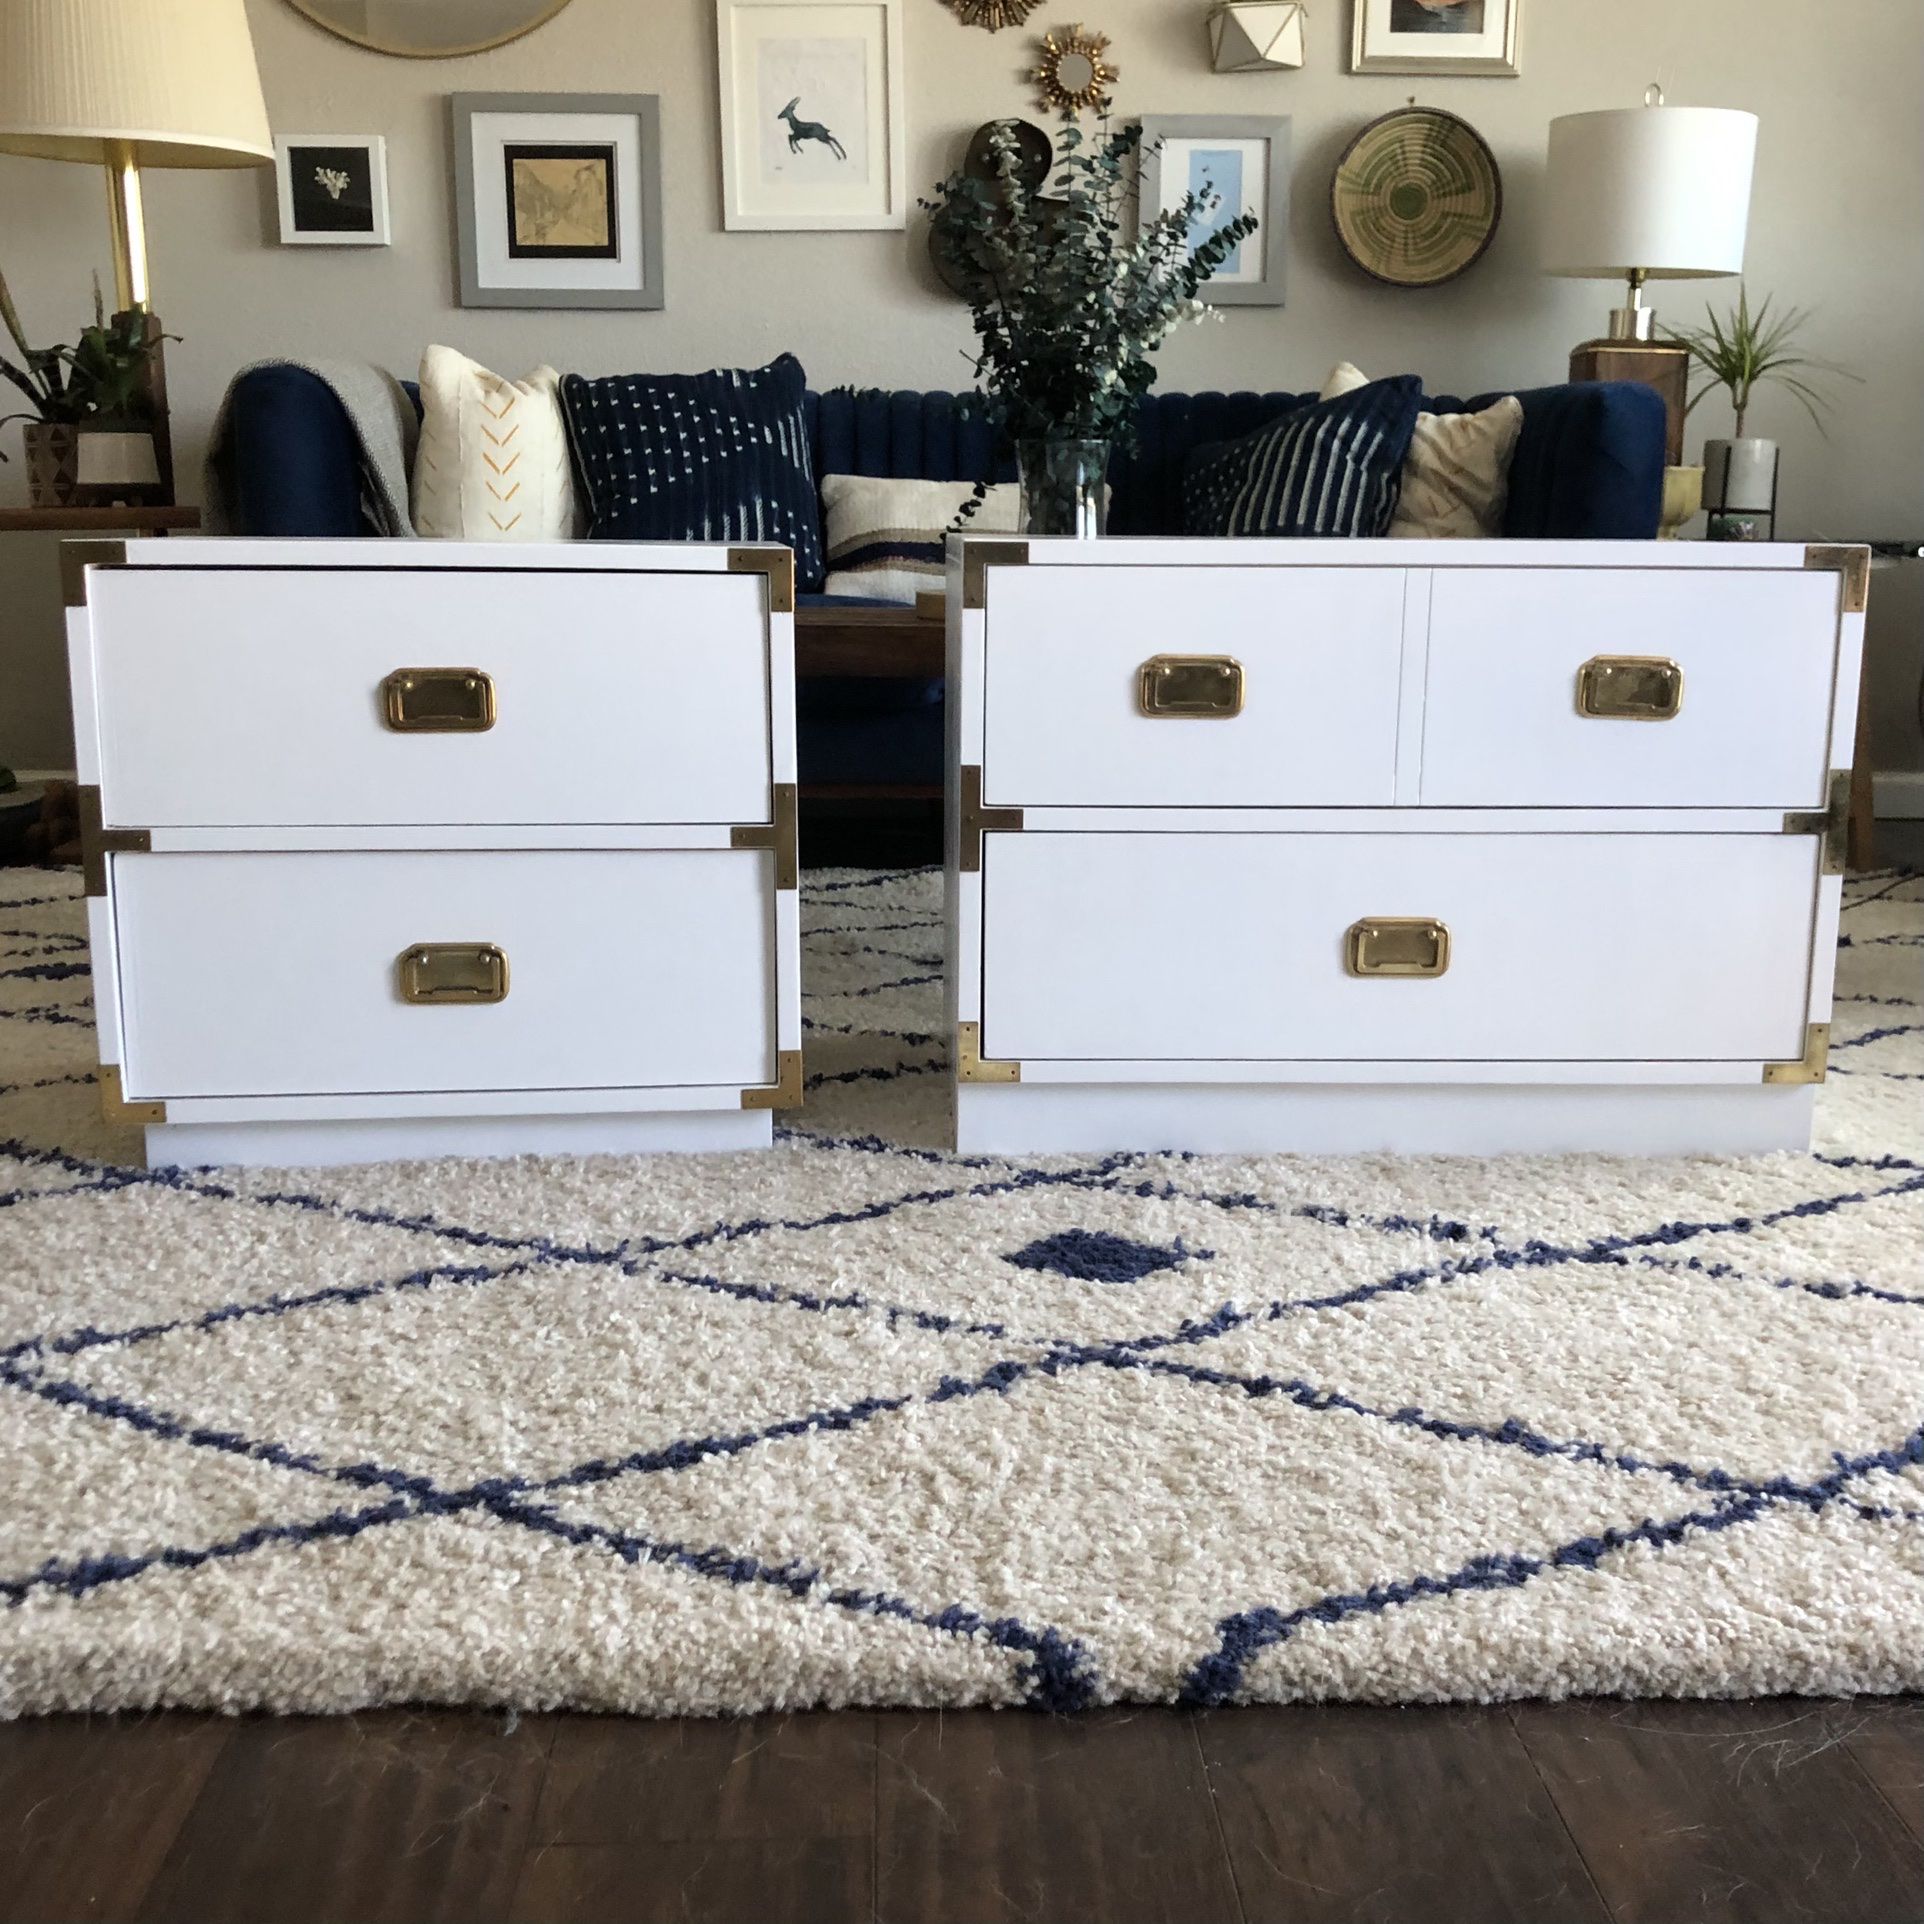 Vintage Campaign Style Nightstands (2)